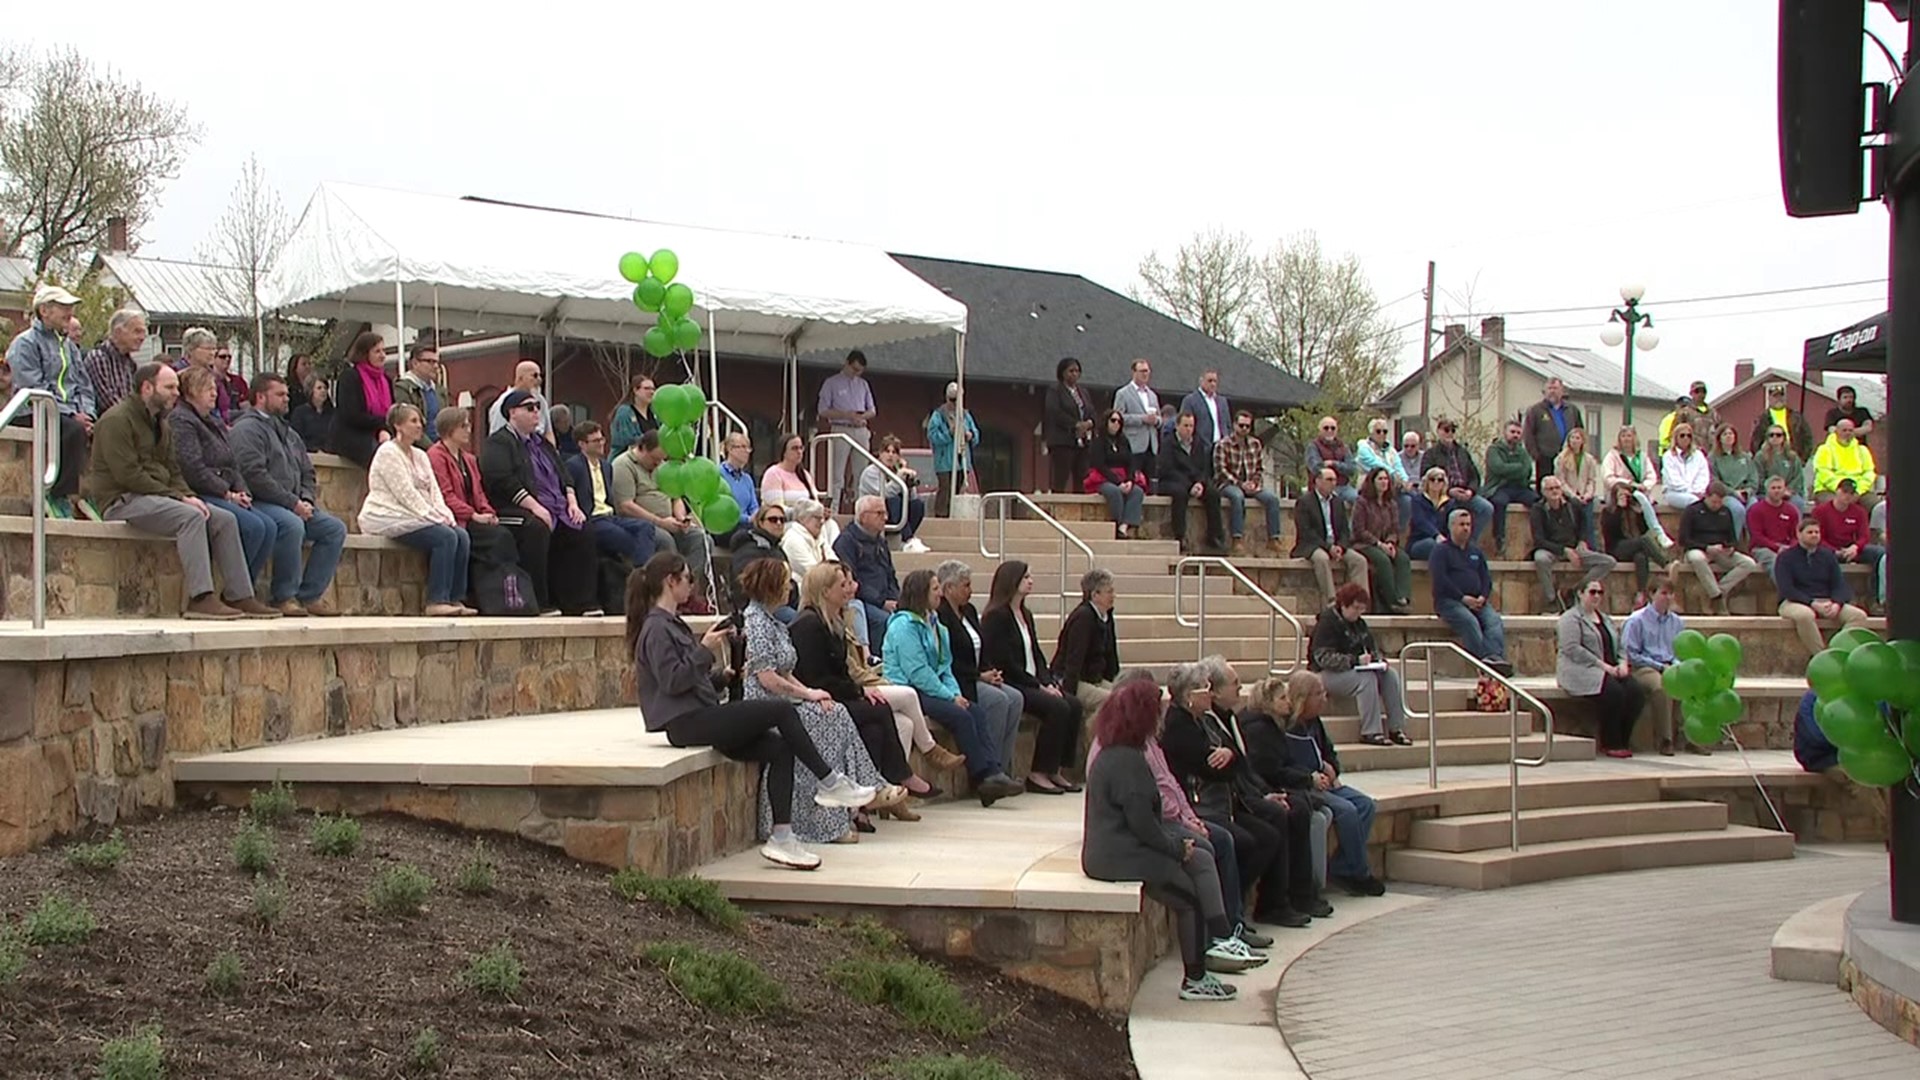 It was an exciting day in Lewisburg as officials unveiled recent renovations at Hufnagle Park.